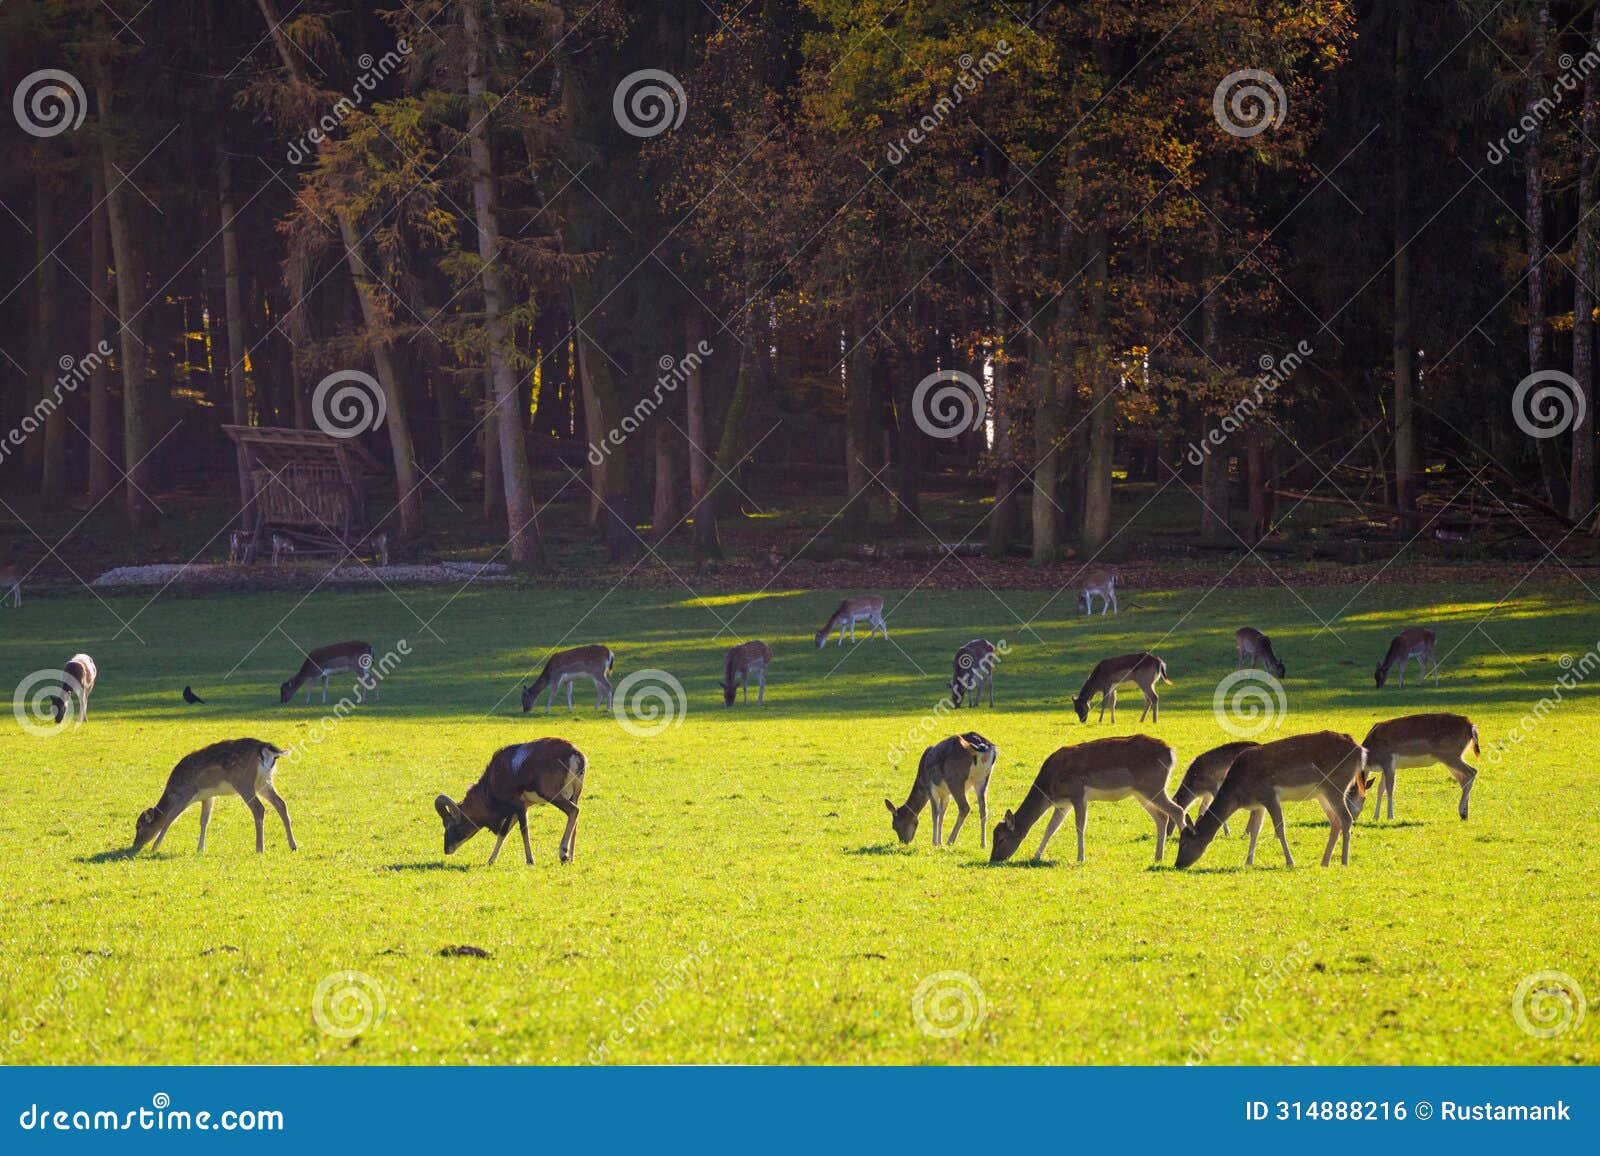 herbivores grazing in the meadow at the wildpark poing which is a wildlife park